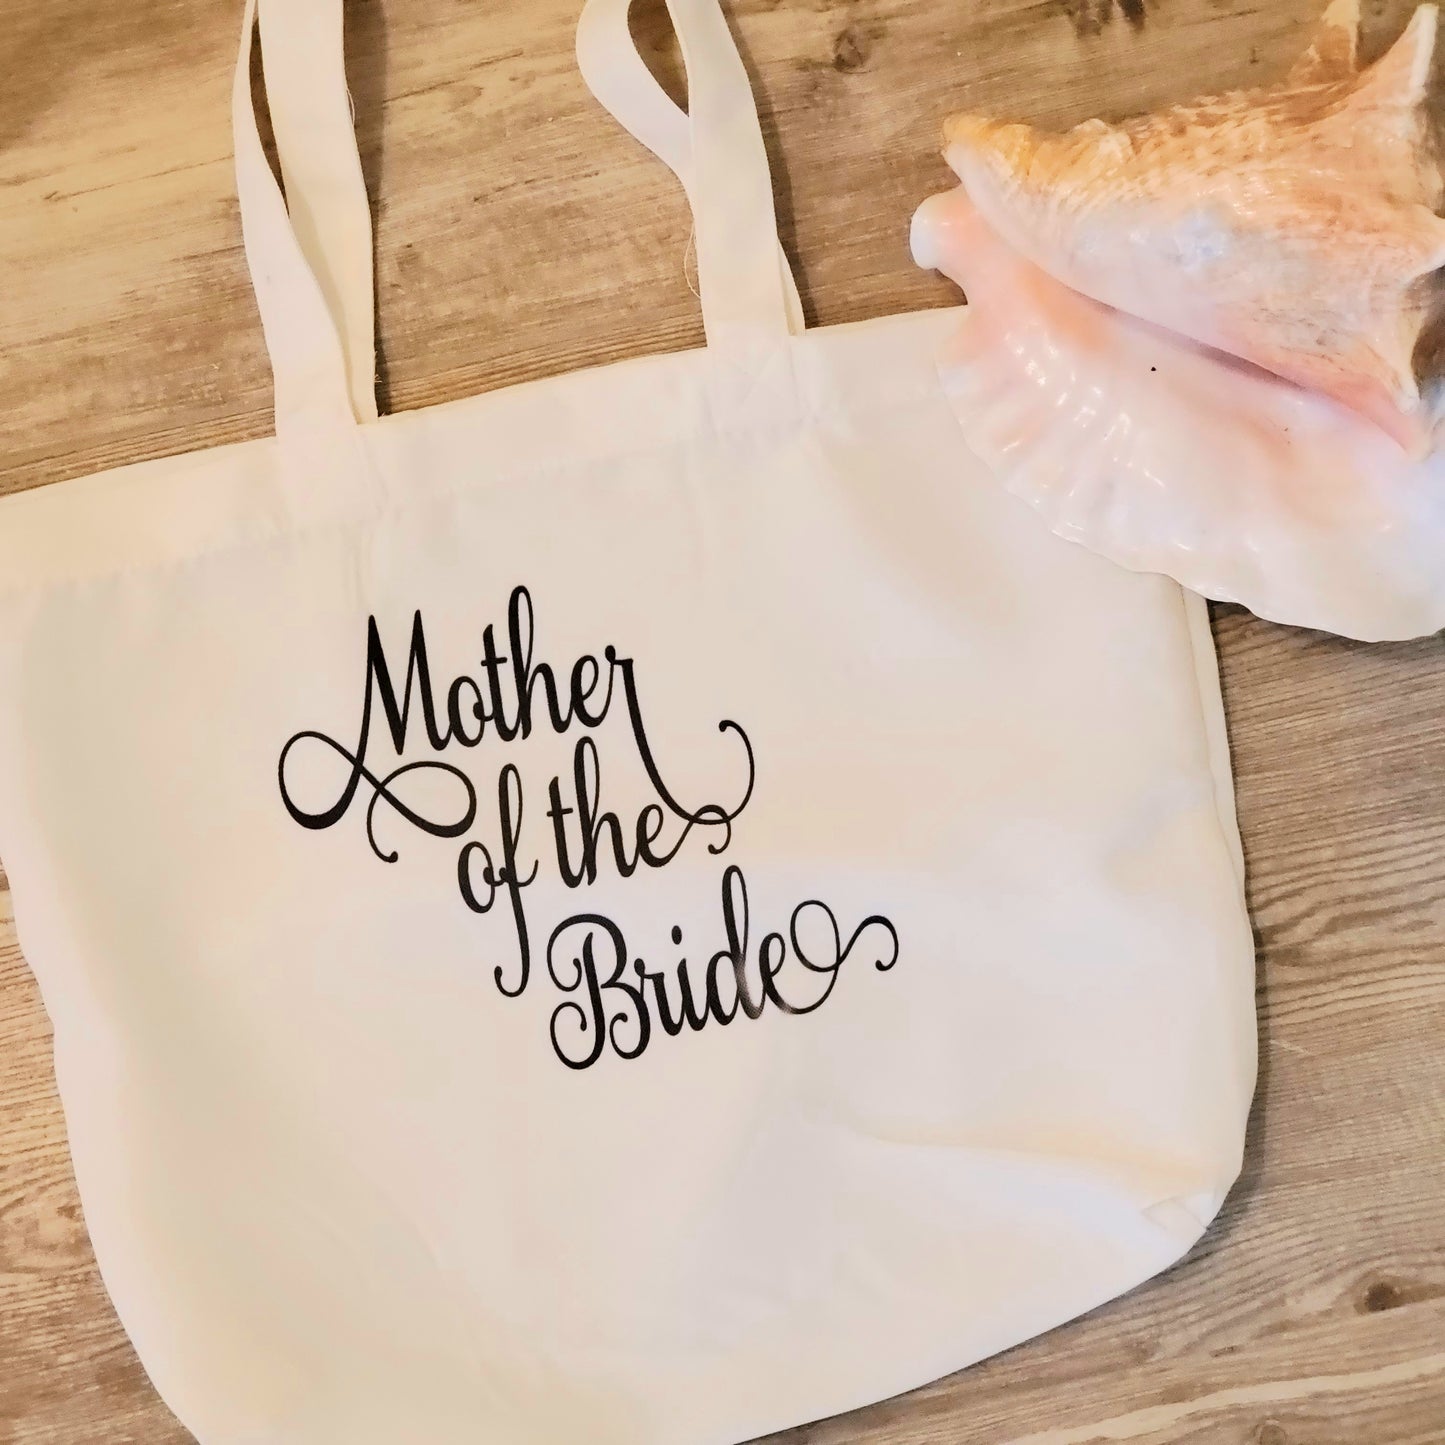 Wedding party tote bags